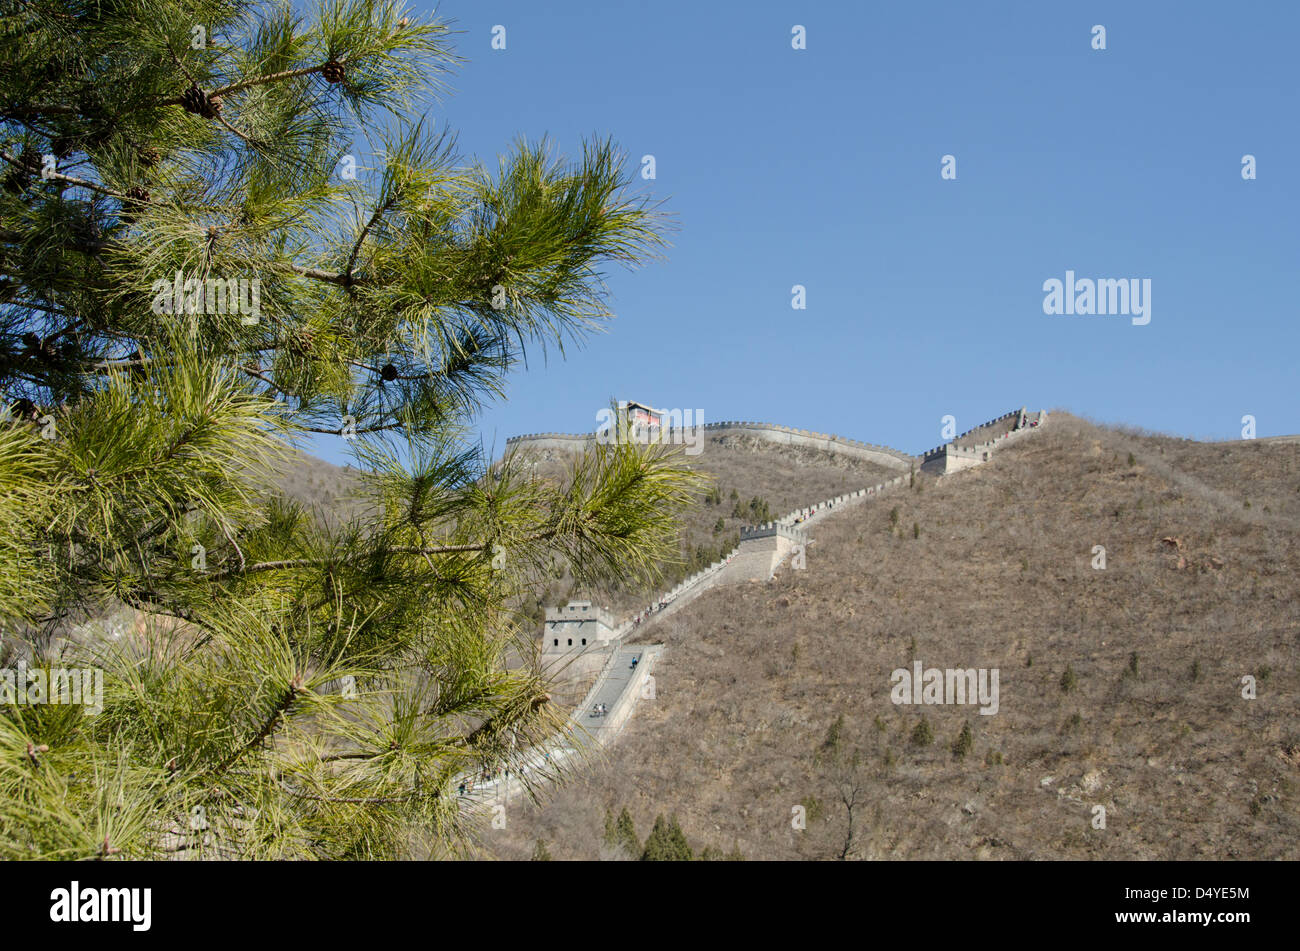 China, Beijing. The Great Wall of China at Juyongguan in the Jundu Mountains at Juyong Pass. A UNESCO World Heritage Site. Stock Photo